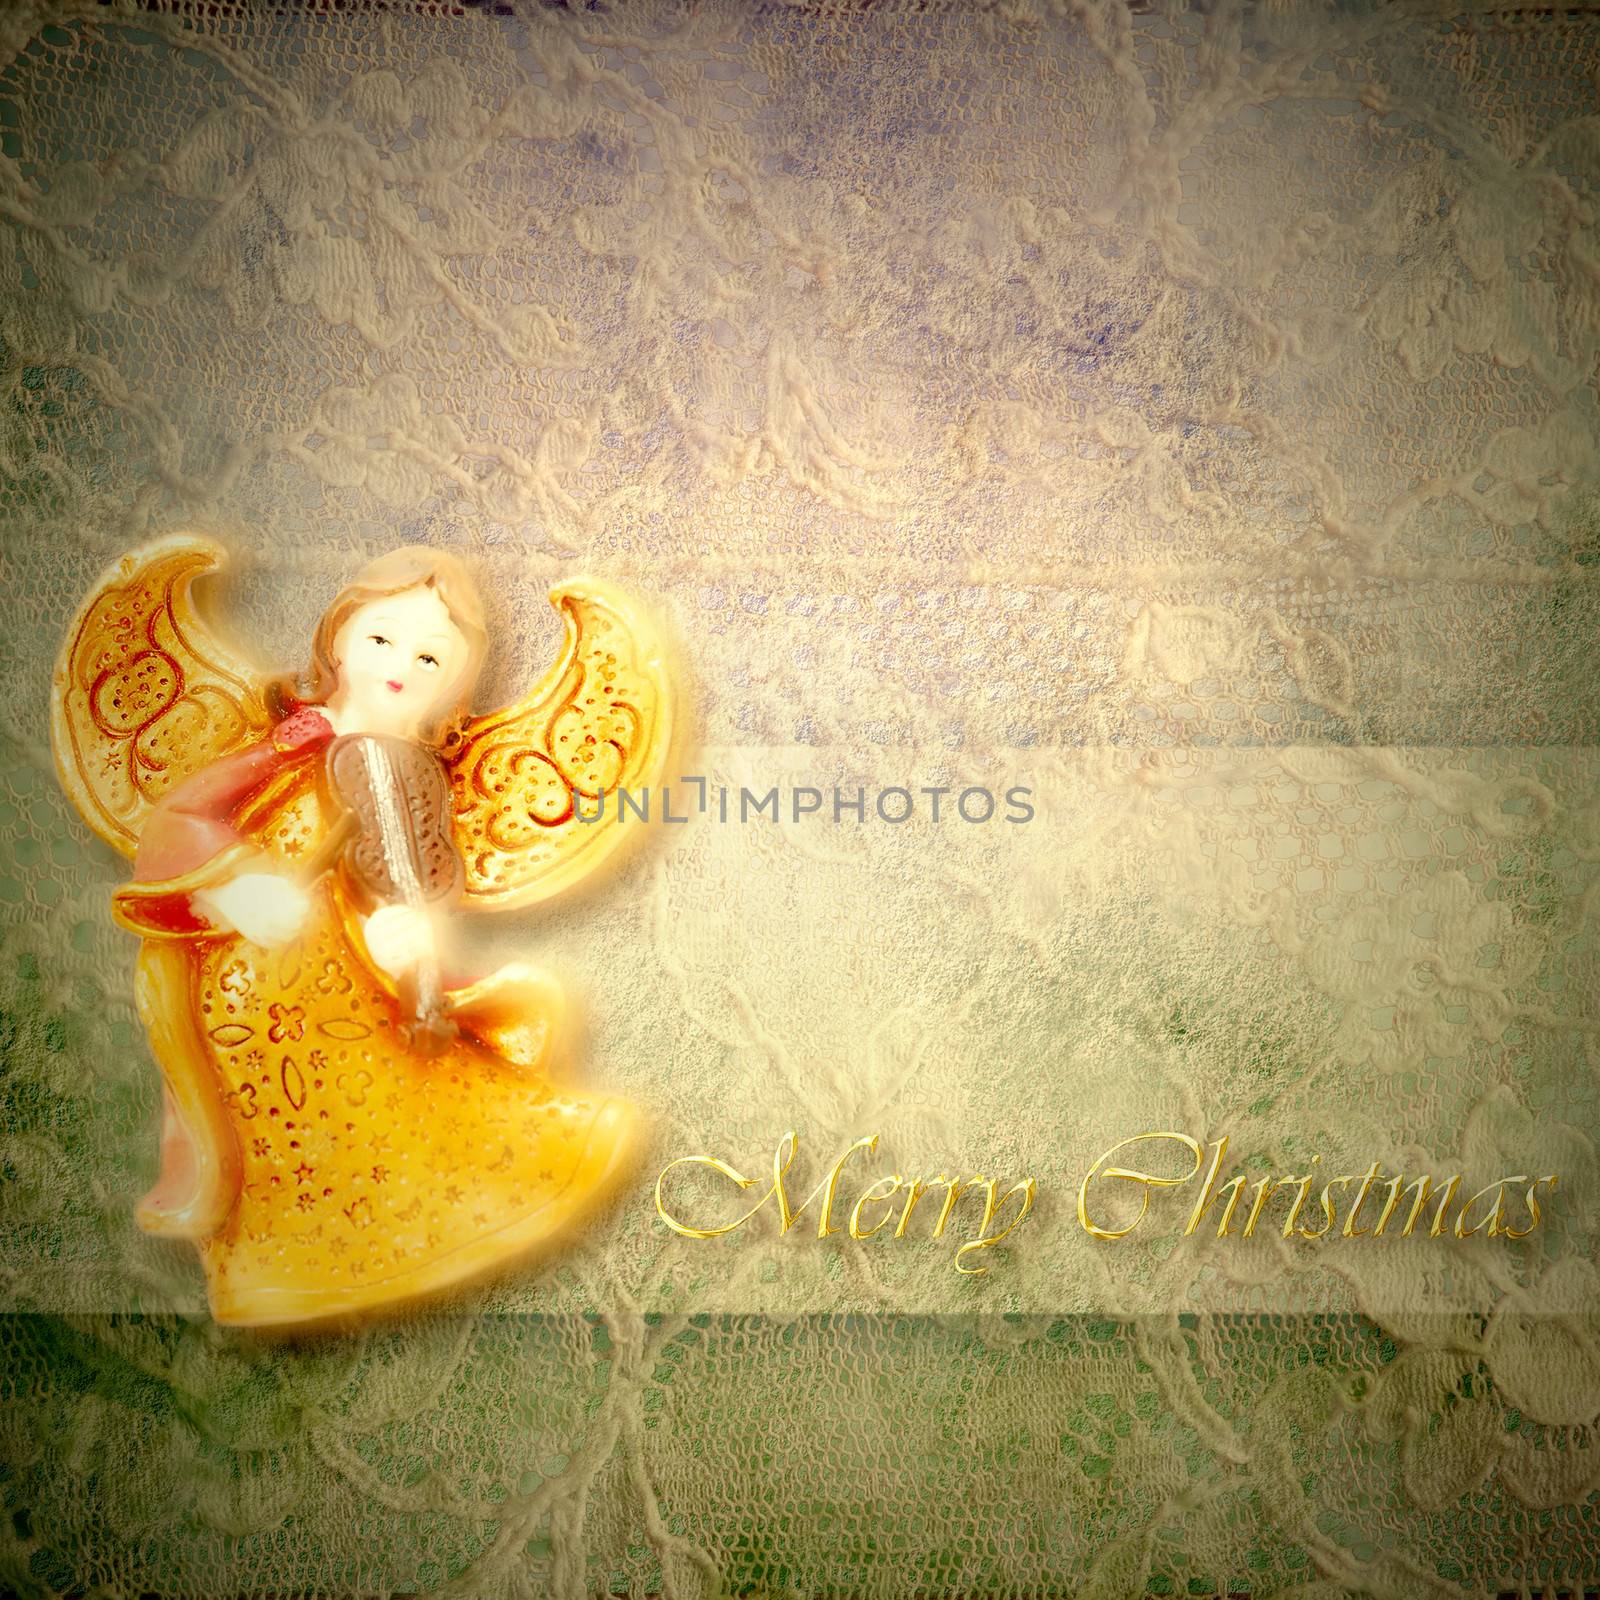 Angel musician Christmas greeting card by Carche